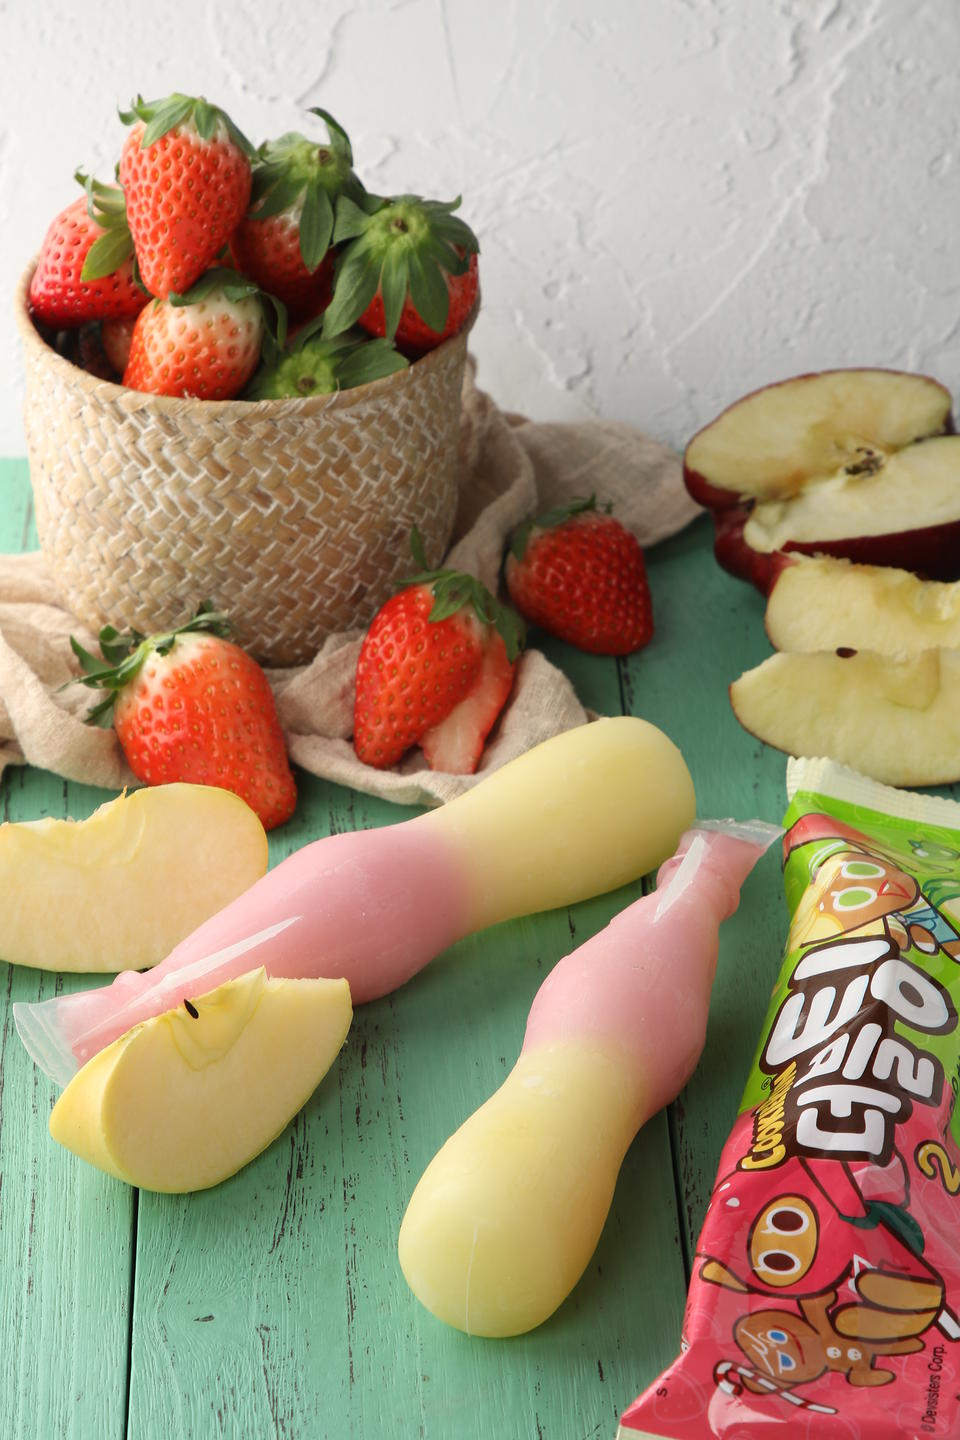 strawberry and apple flavor popsicle